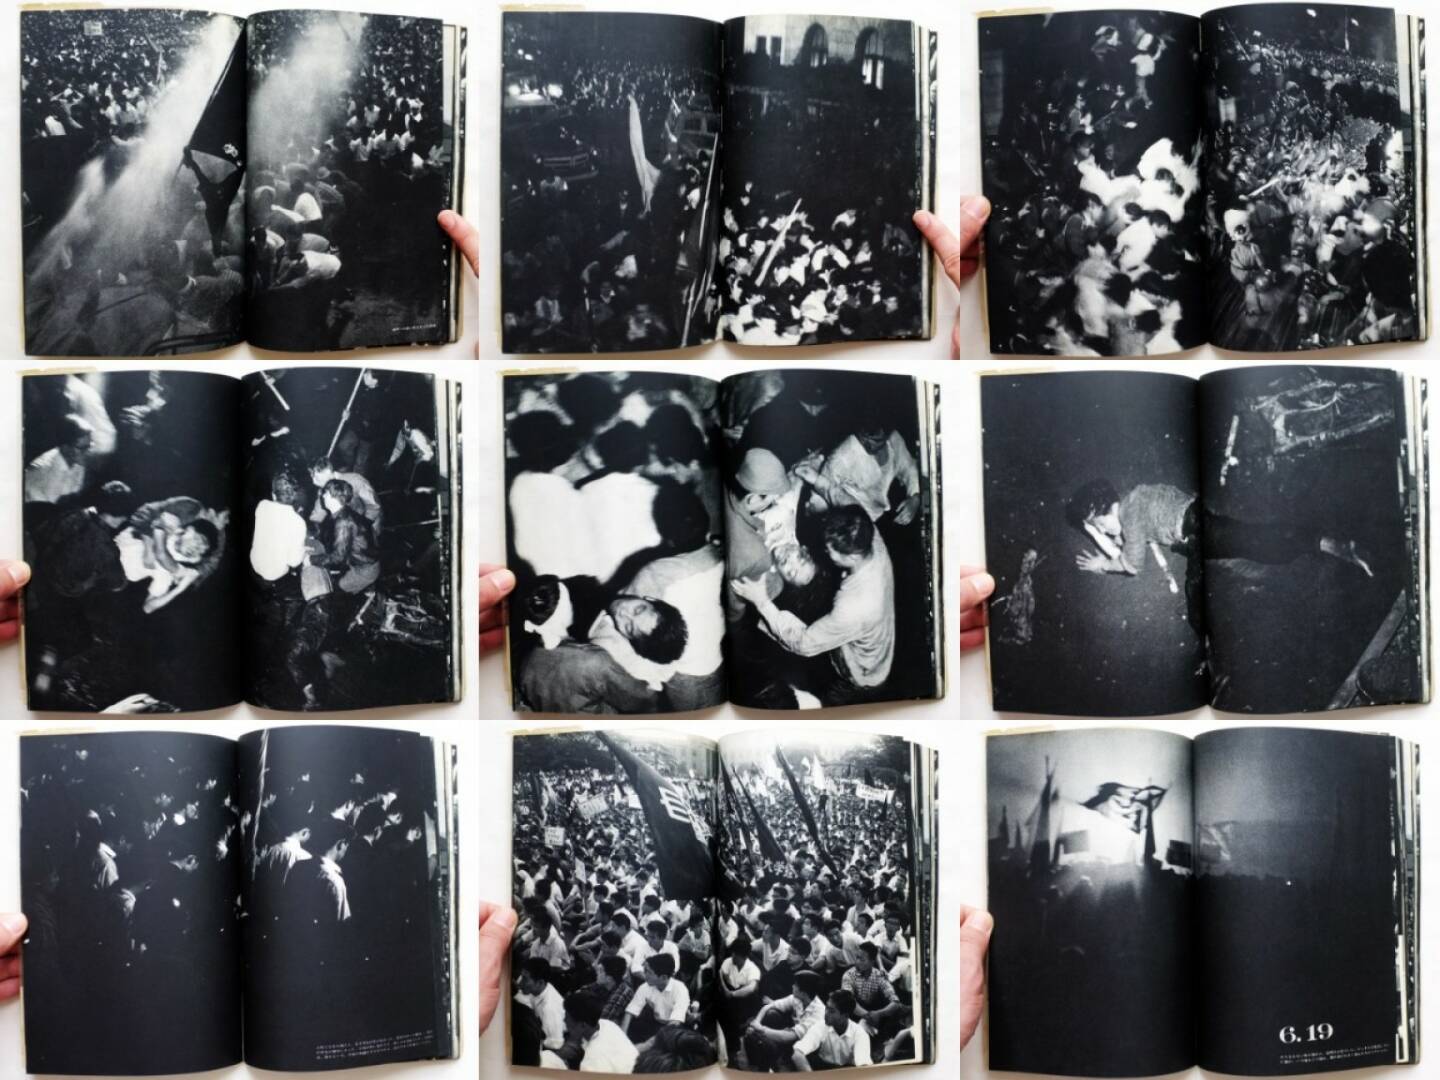 Hiroshi Hamaya - A Chronicle of Grief and Anger (濱谷浩 怒りと悲しみの記録), Kawade Shobo Shinsha 1960, Beispielseiten, sample spreads - http://josefchladek.com/book/hiroshi_hamaya_-_a_chronicle_of_grief_and_anger